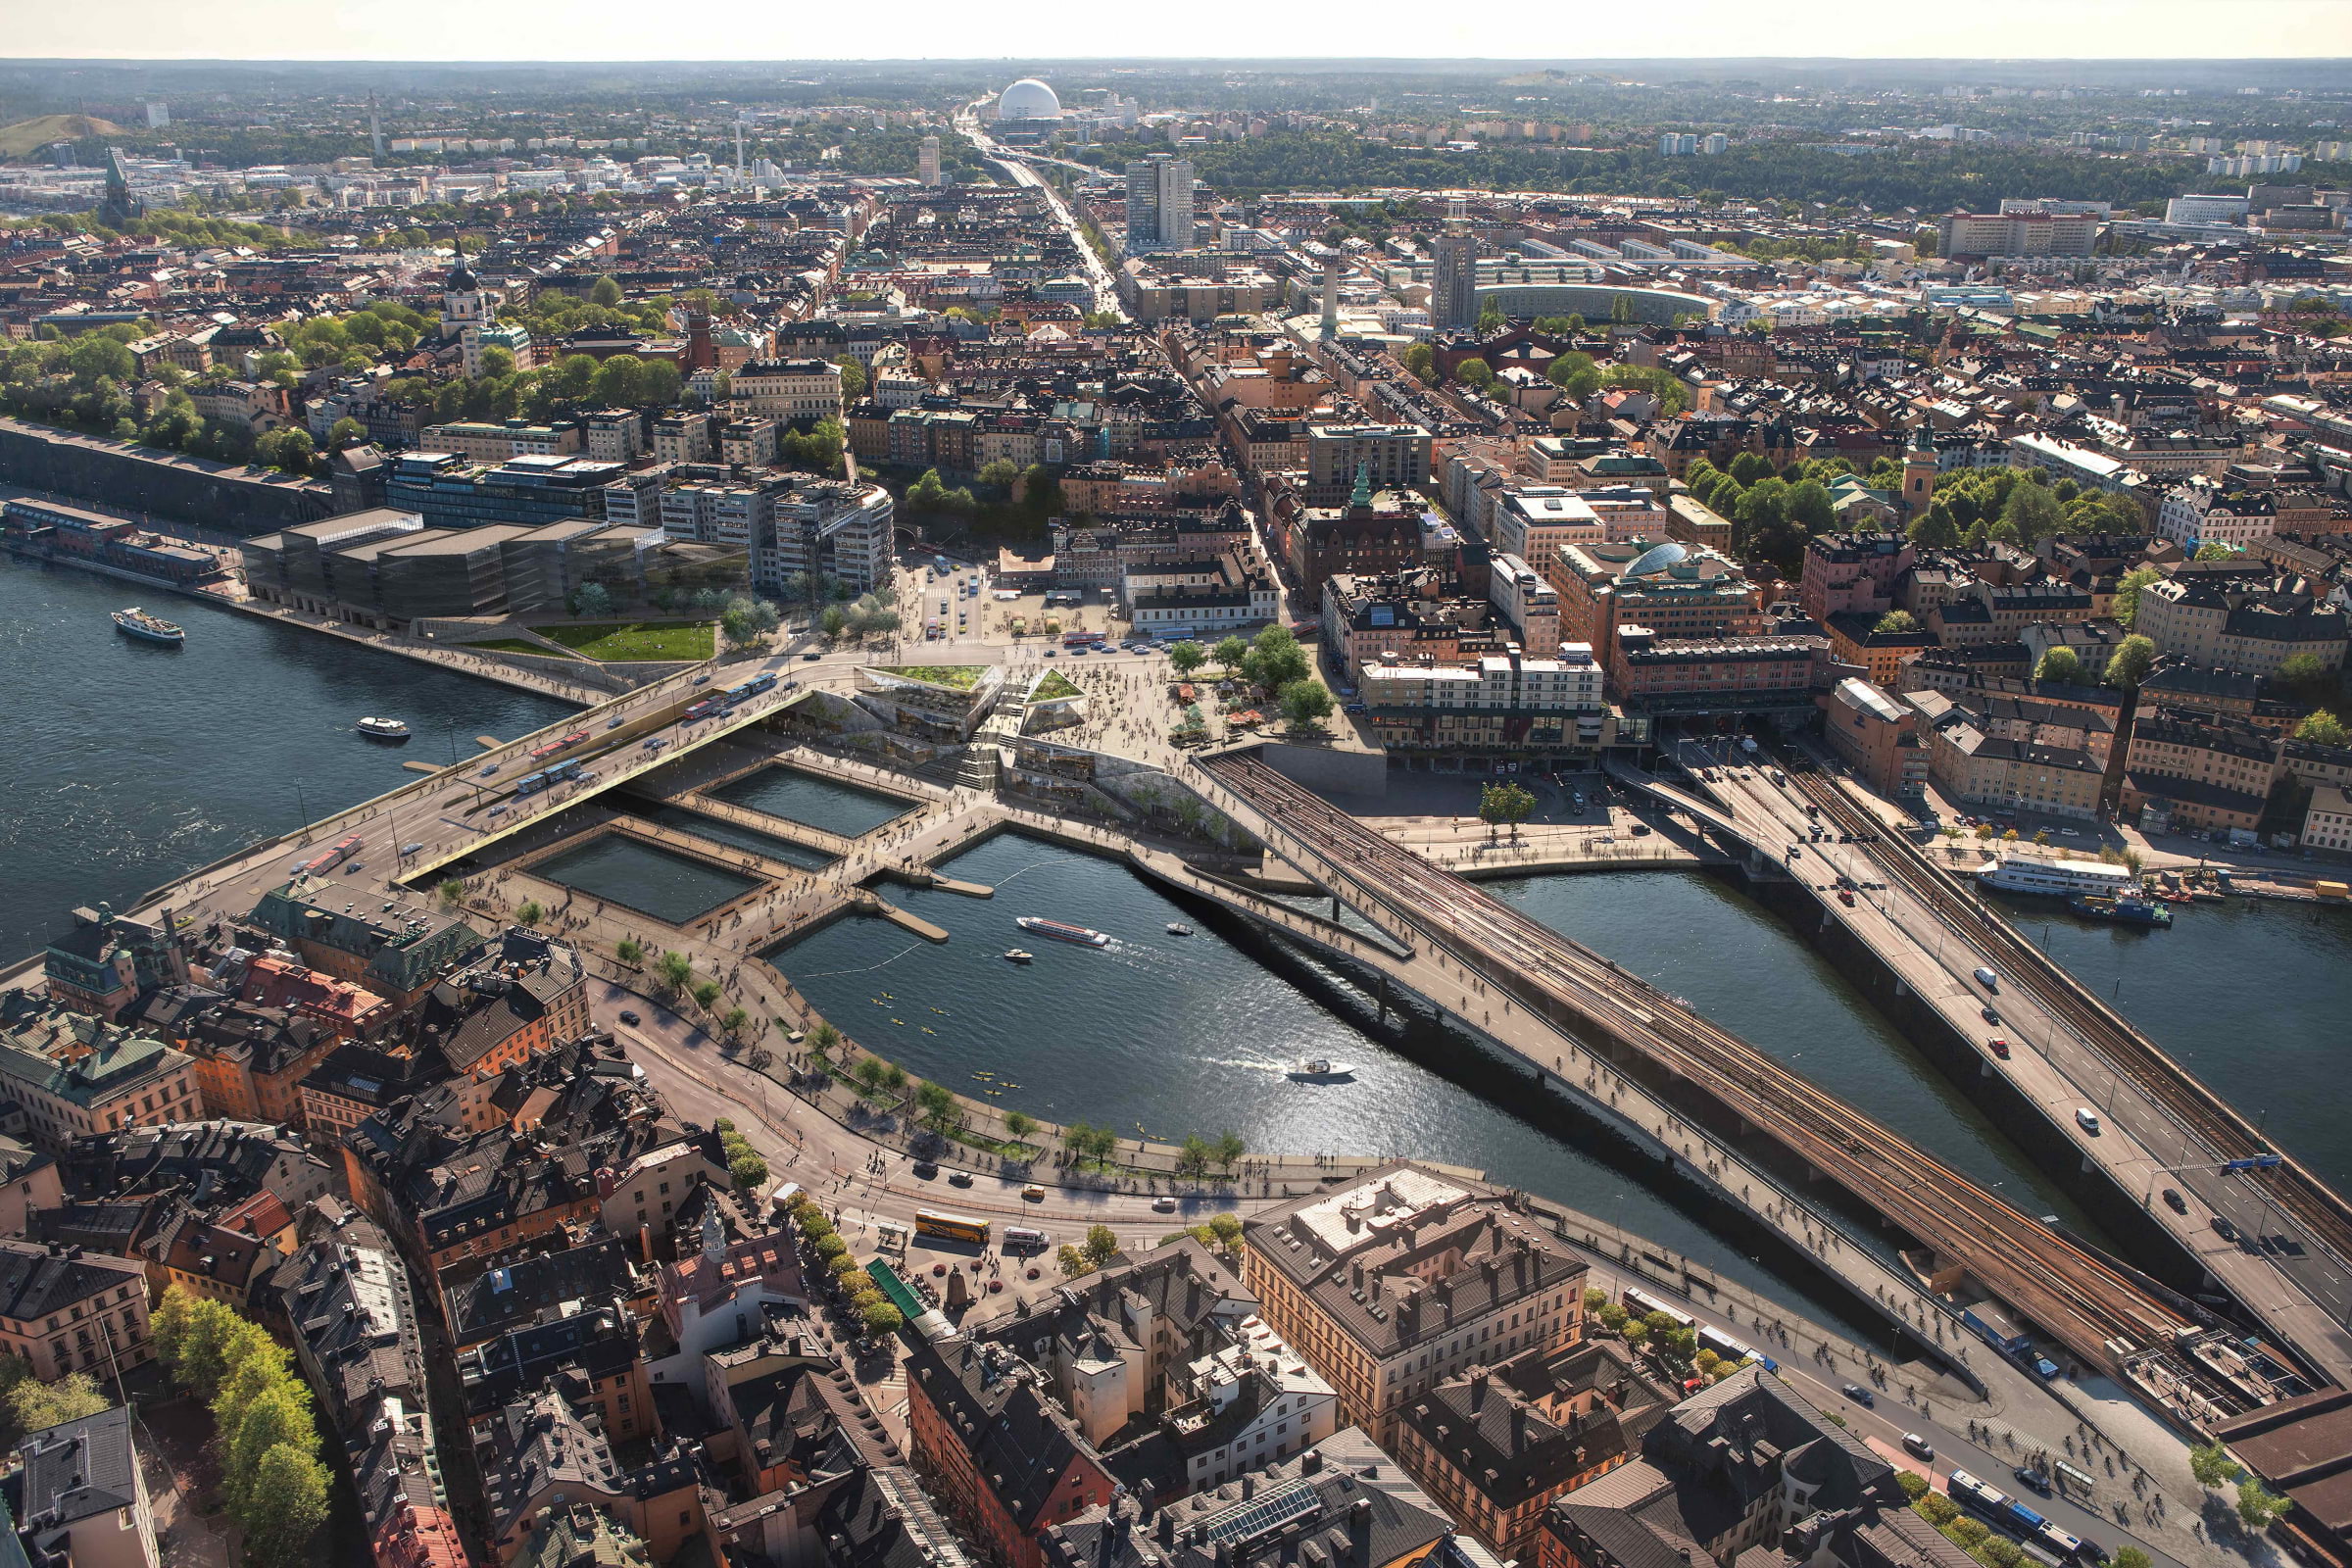 Foto: DBOX for Foster + Partners via Stockholms stad